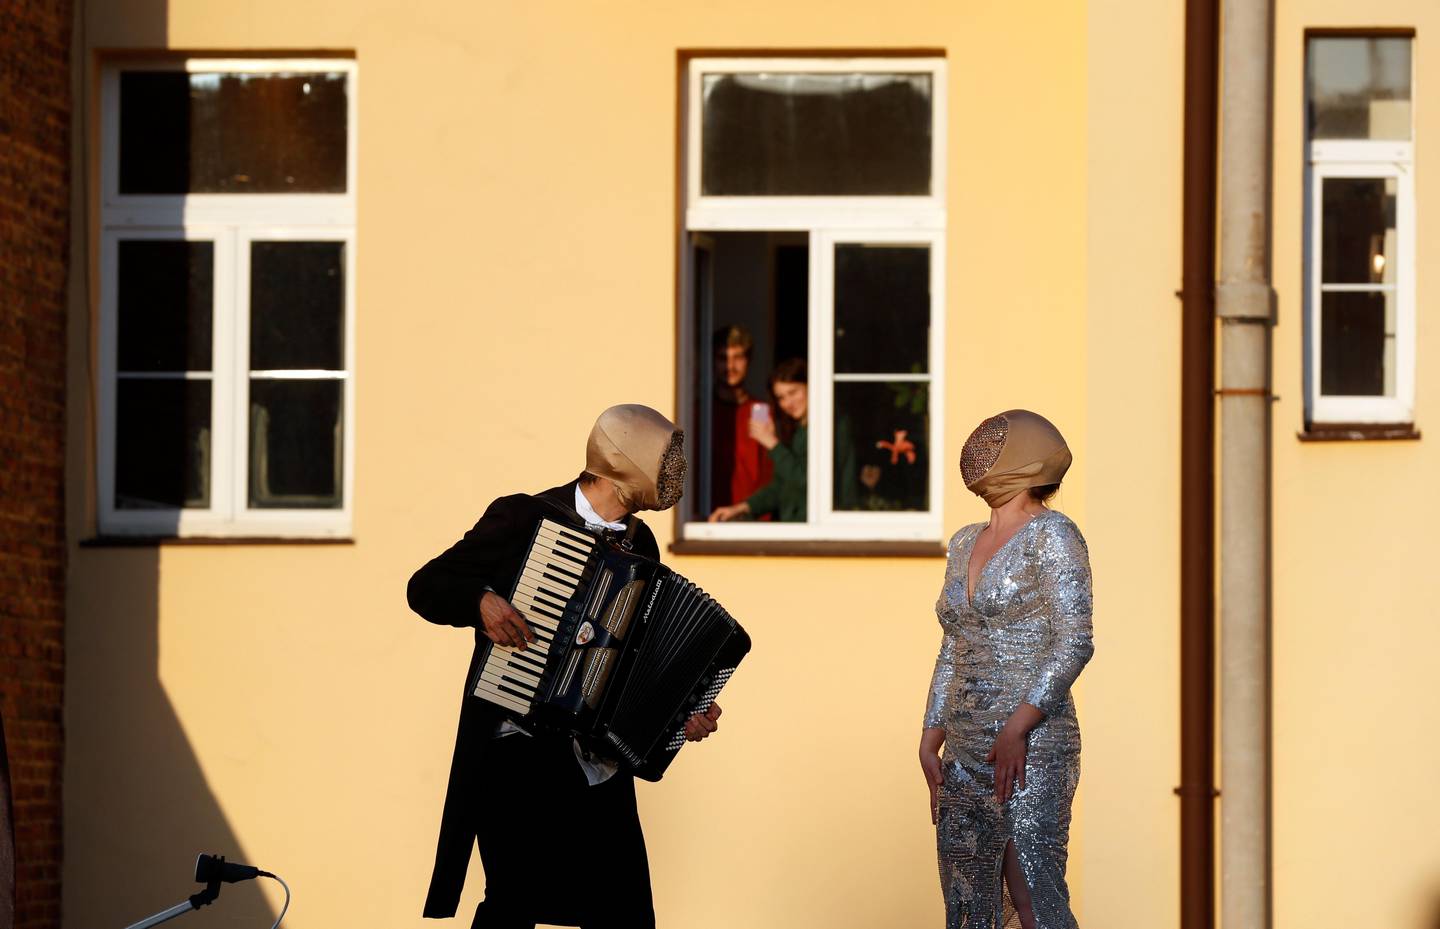 Street musicians entertain residents, as people stay in their houses to counter the spread of coronavirus, in Prague, Czech Republic, Tuesday, April 7, 2020. The Czech Republic's government has incorporated dramatic restrictive measures to try and stem the spread of the new coronavirus called COVID-19. The new coronavirus causes mild or moderate symptoms for most people, but for some, especially older adults and people with existing health problems, it can cause more severe illness or death. (AP Photo/Petr David Josek)